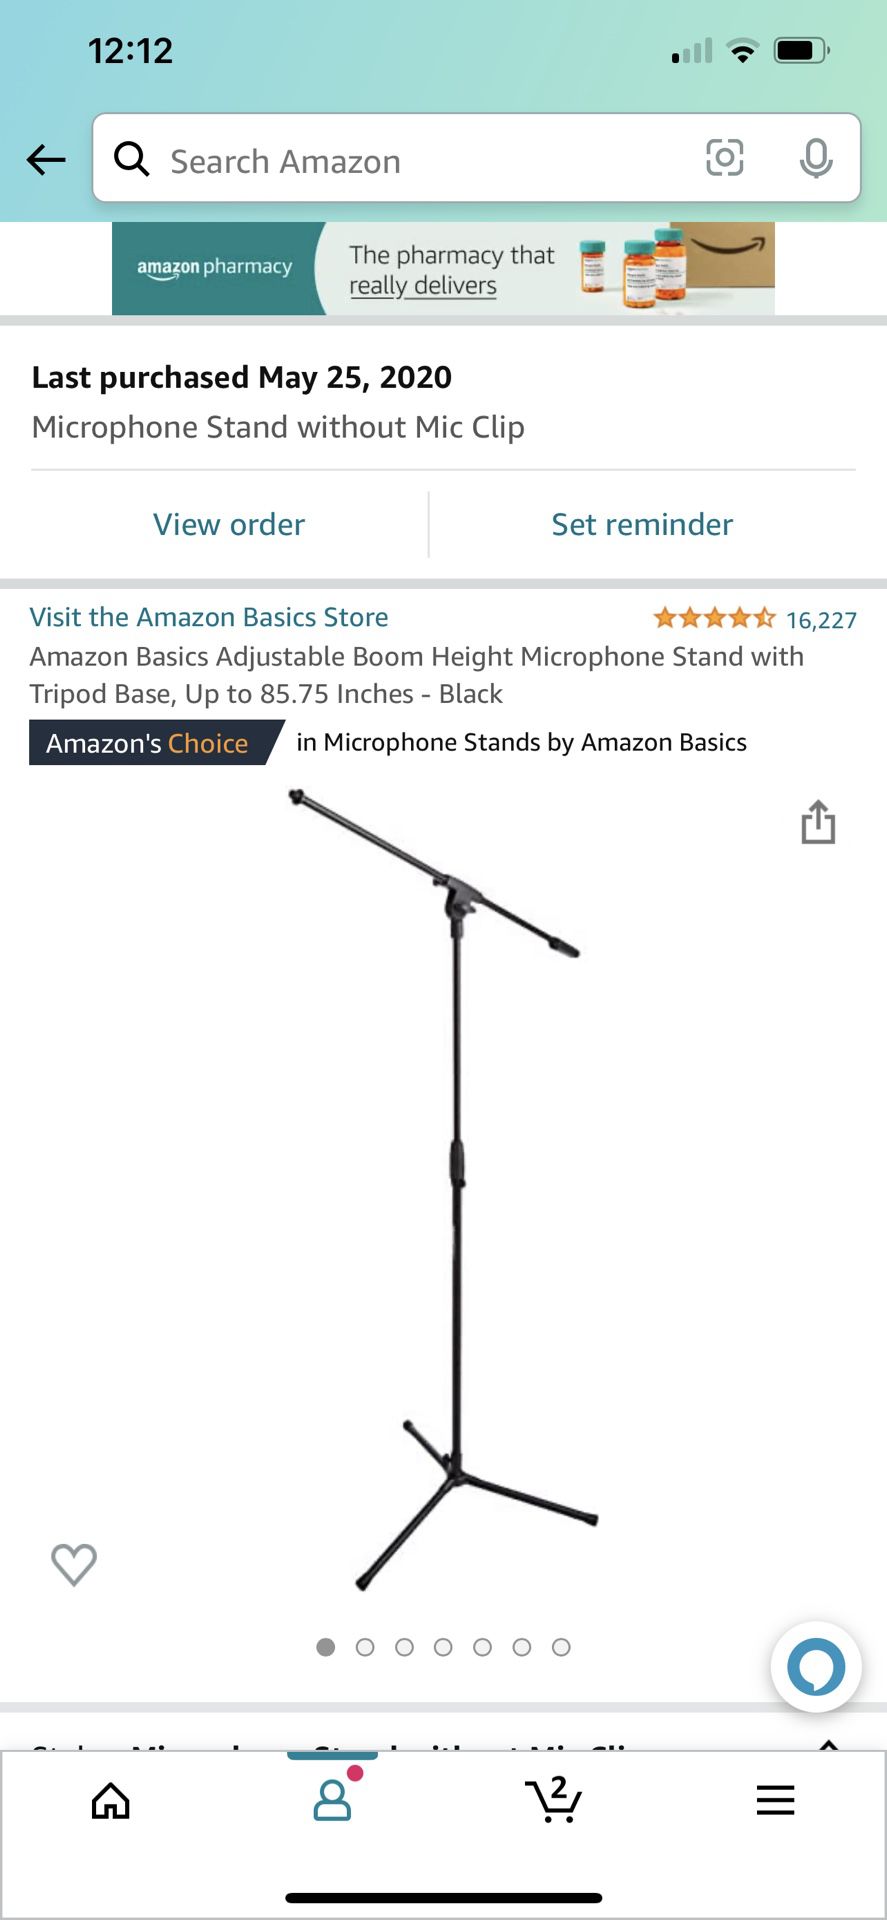 Basics Adjustable Boom Height Microphone Stand with Tripod Base, Up  to 85.75 Inches - Black